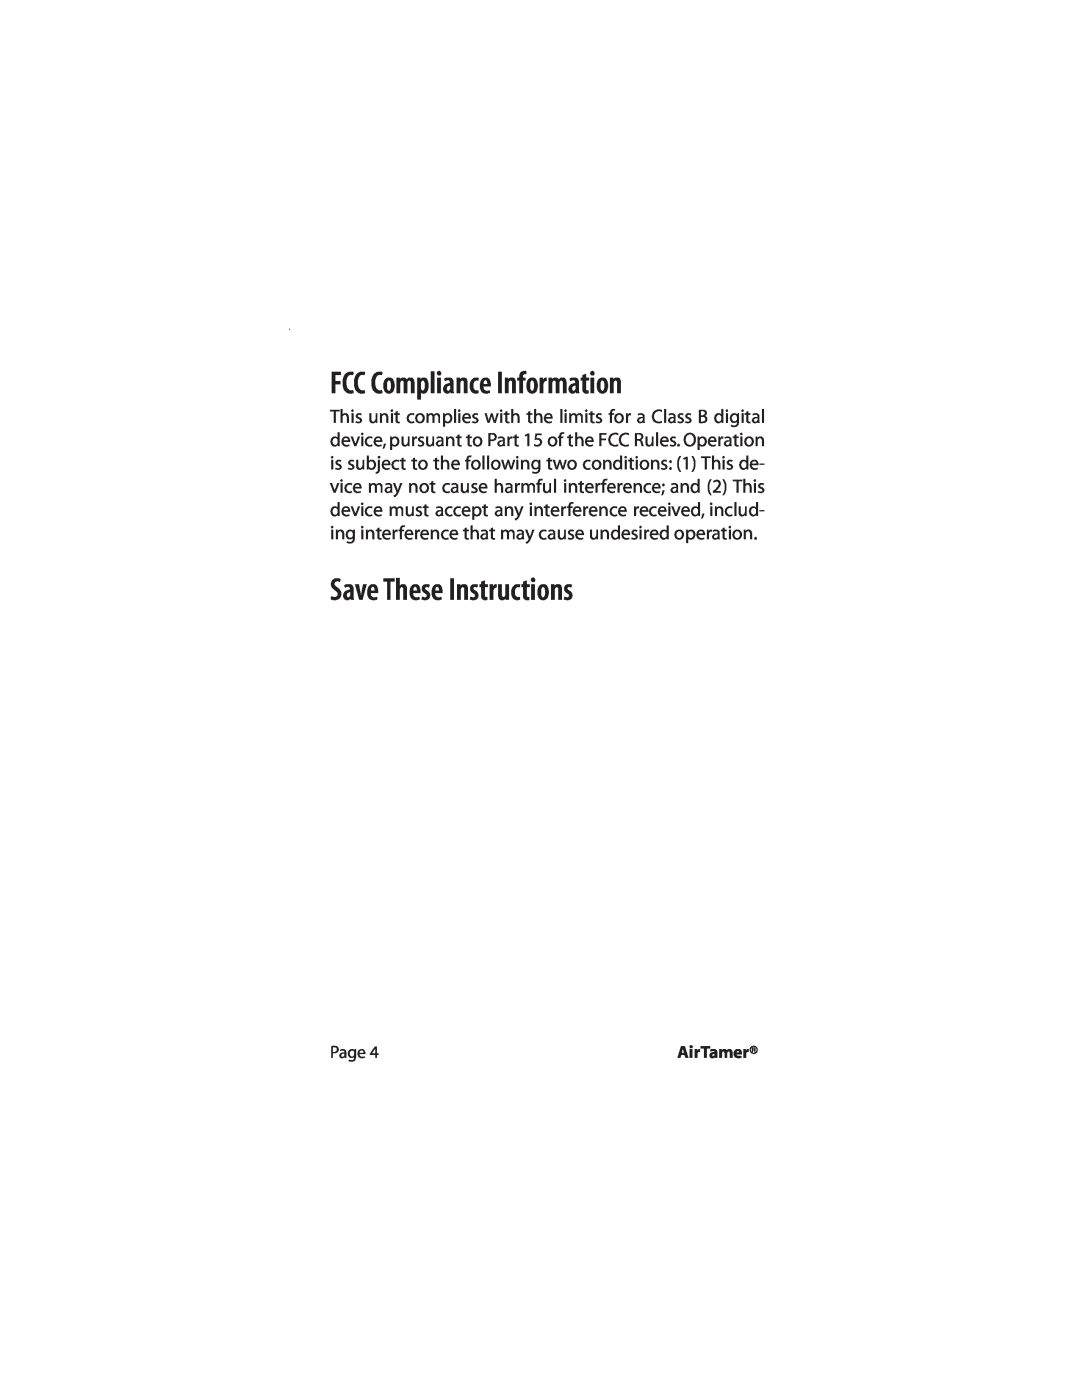 FilterStream A400 instruction manual FCC Compliance Information, Save These Instructions, Page, AirTamer 